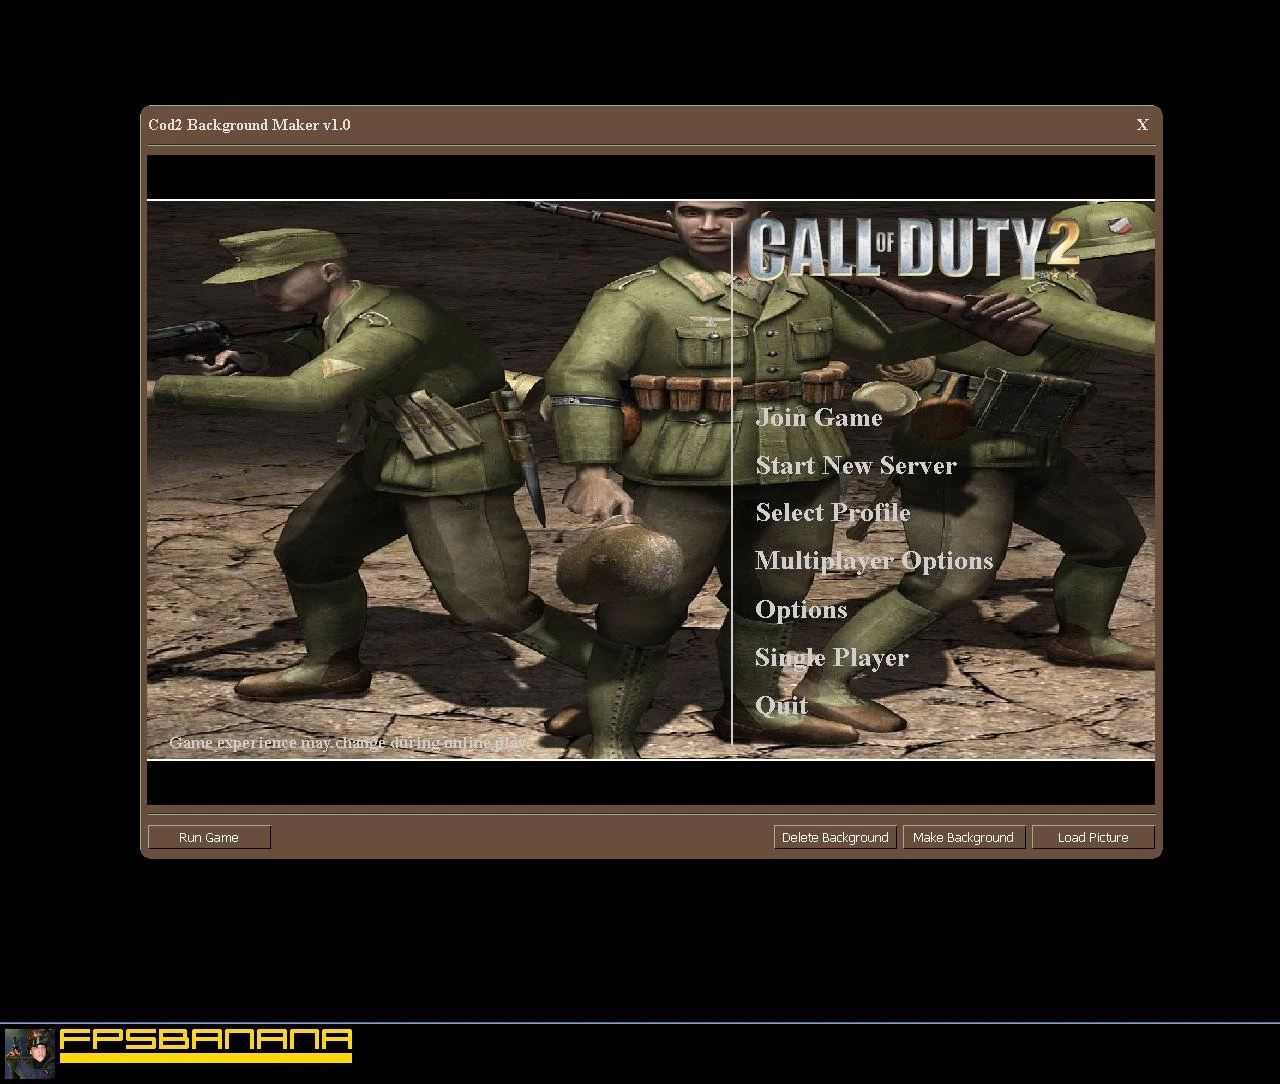 Cod2 Background Maker v1.0 [Call of Duty 2 ] [Modding Tools] - 